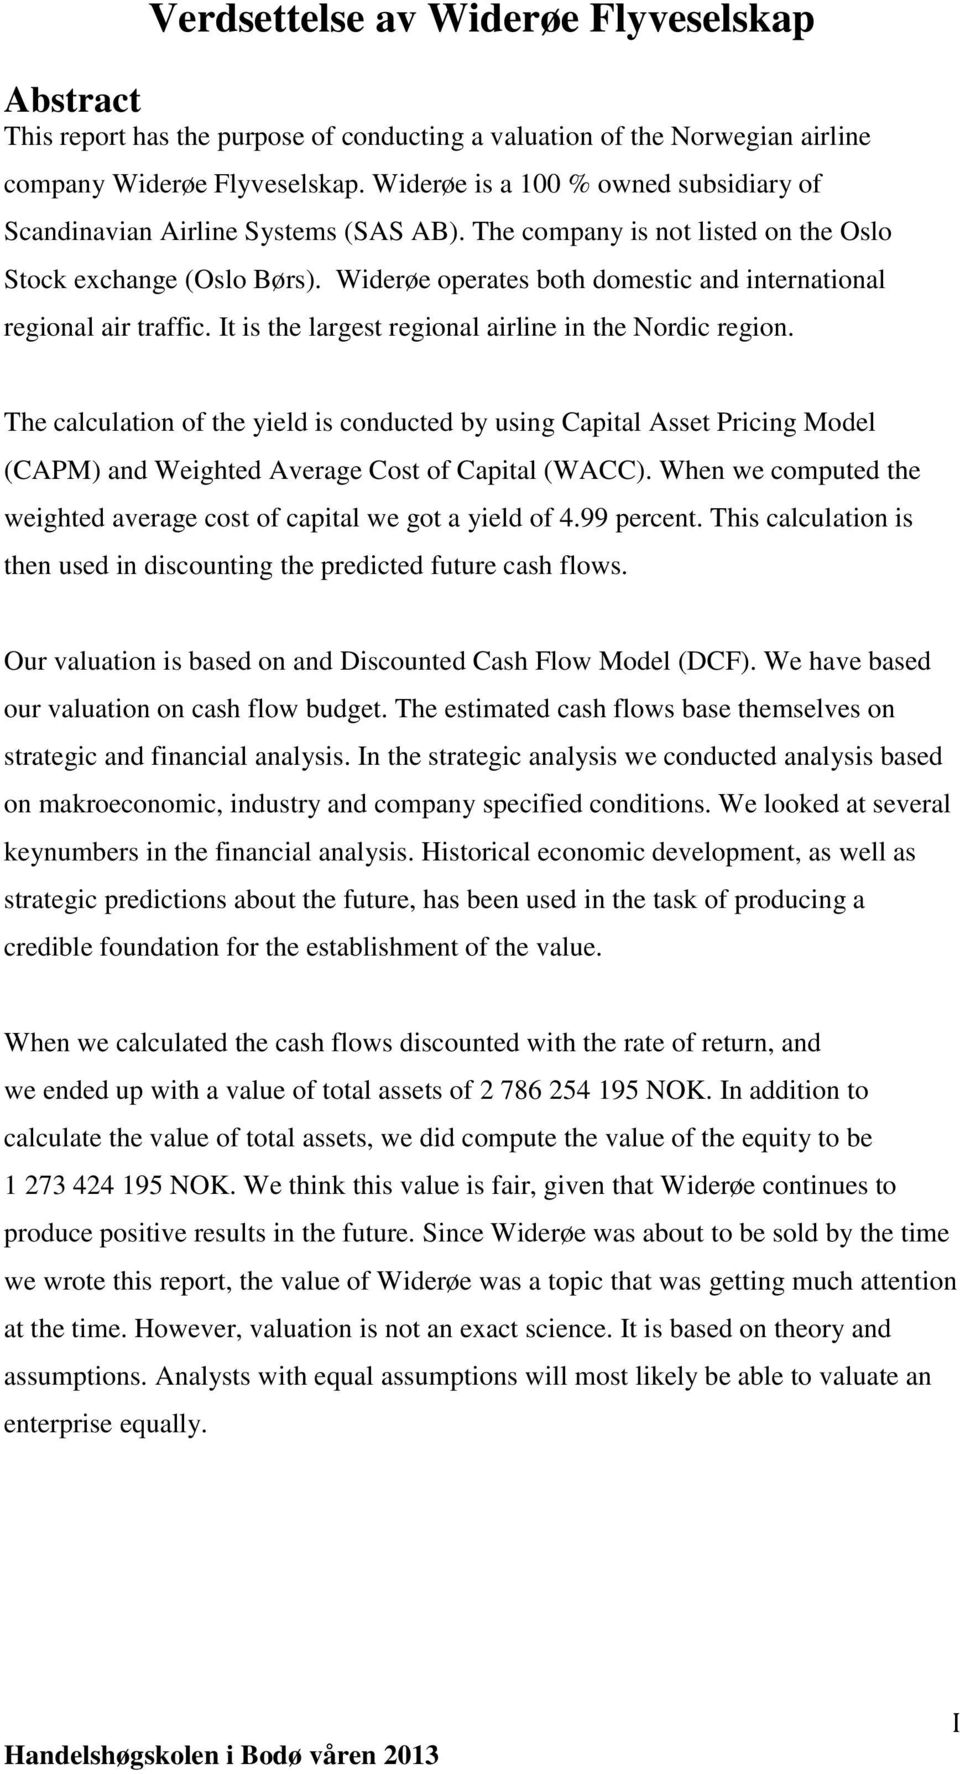 The calculation of the yield is conducted by using Capital Asset Pricing Model (CAPM) and Weighted Average Cost of Capital (WACC).